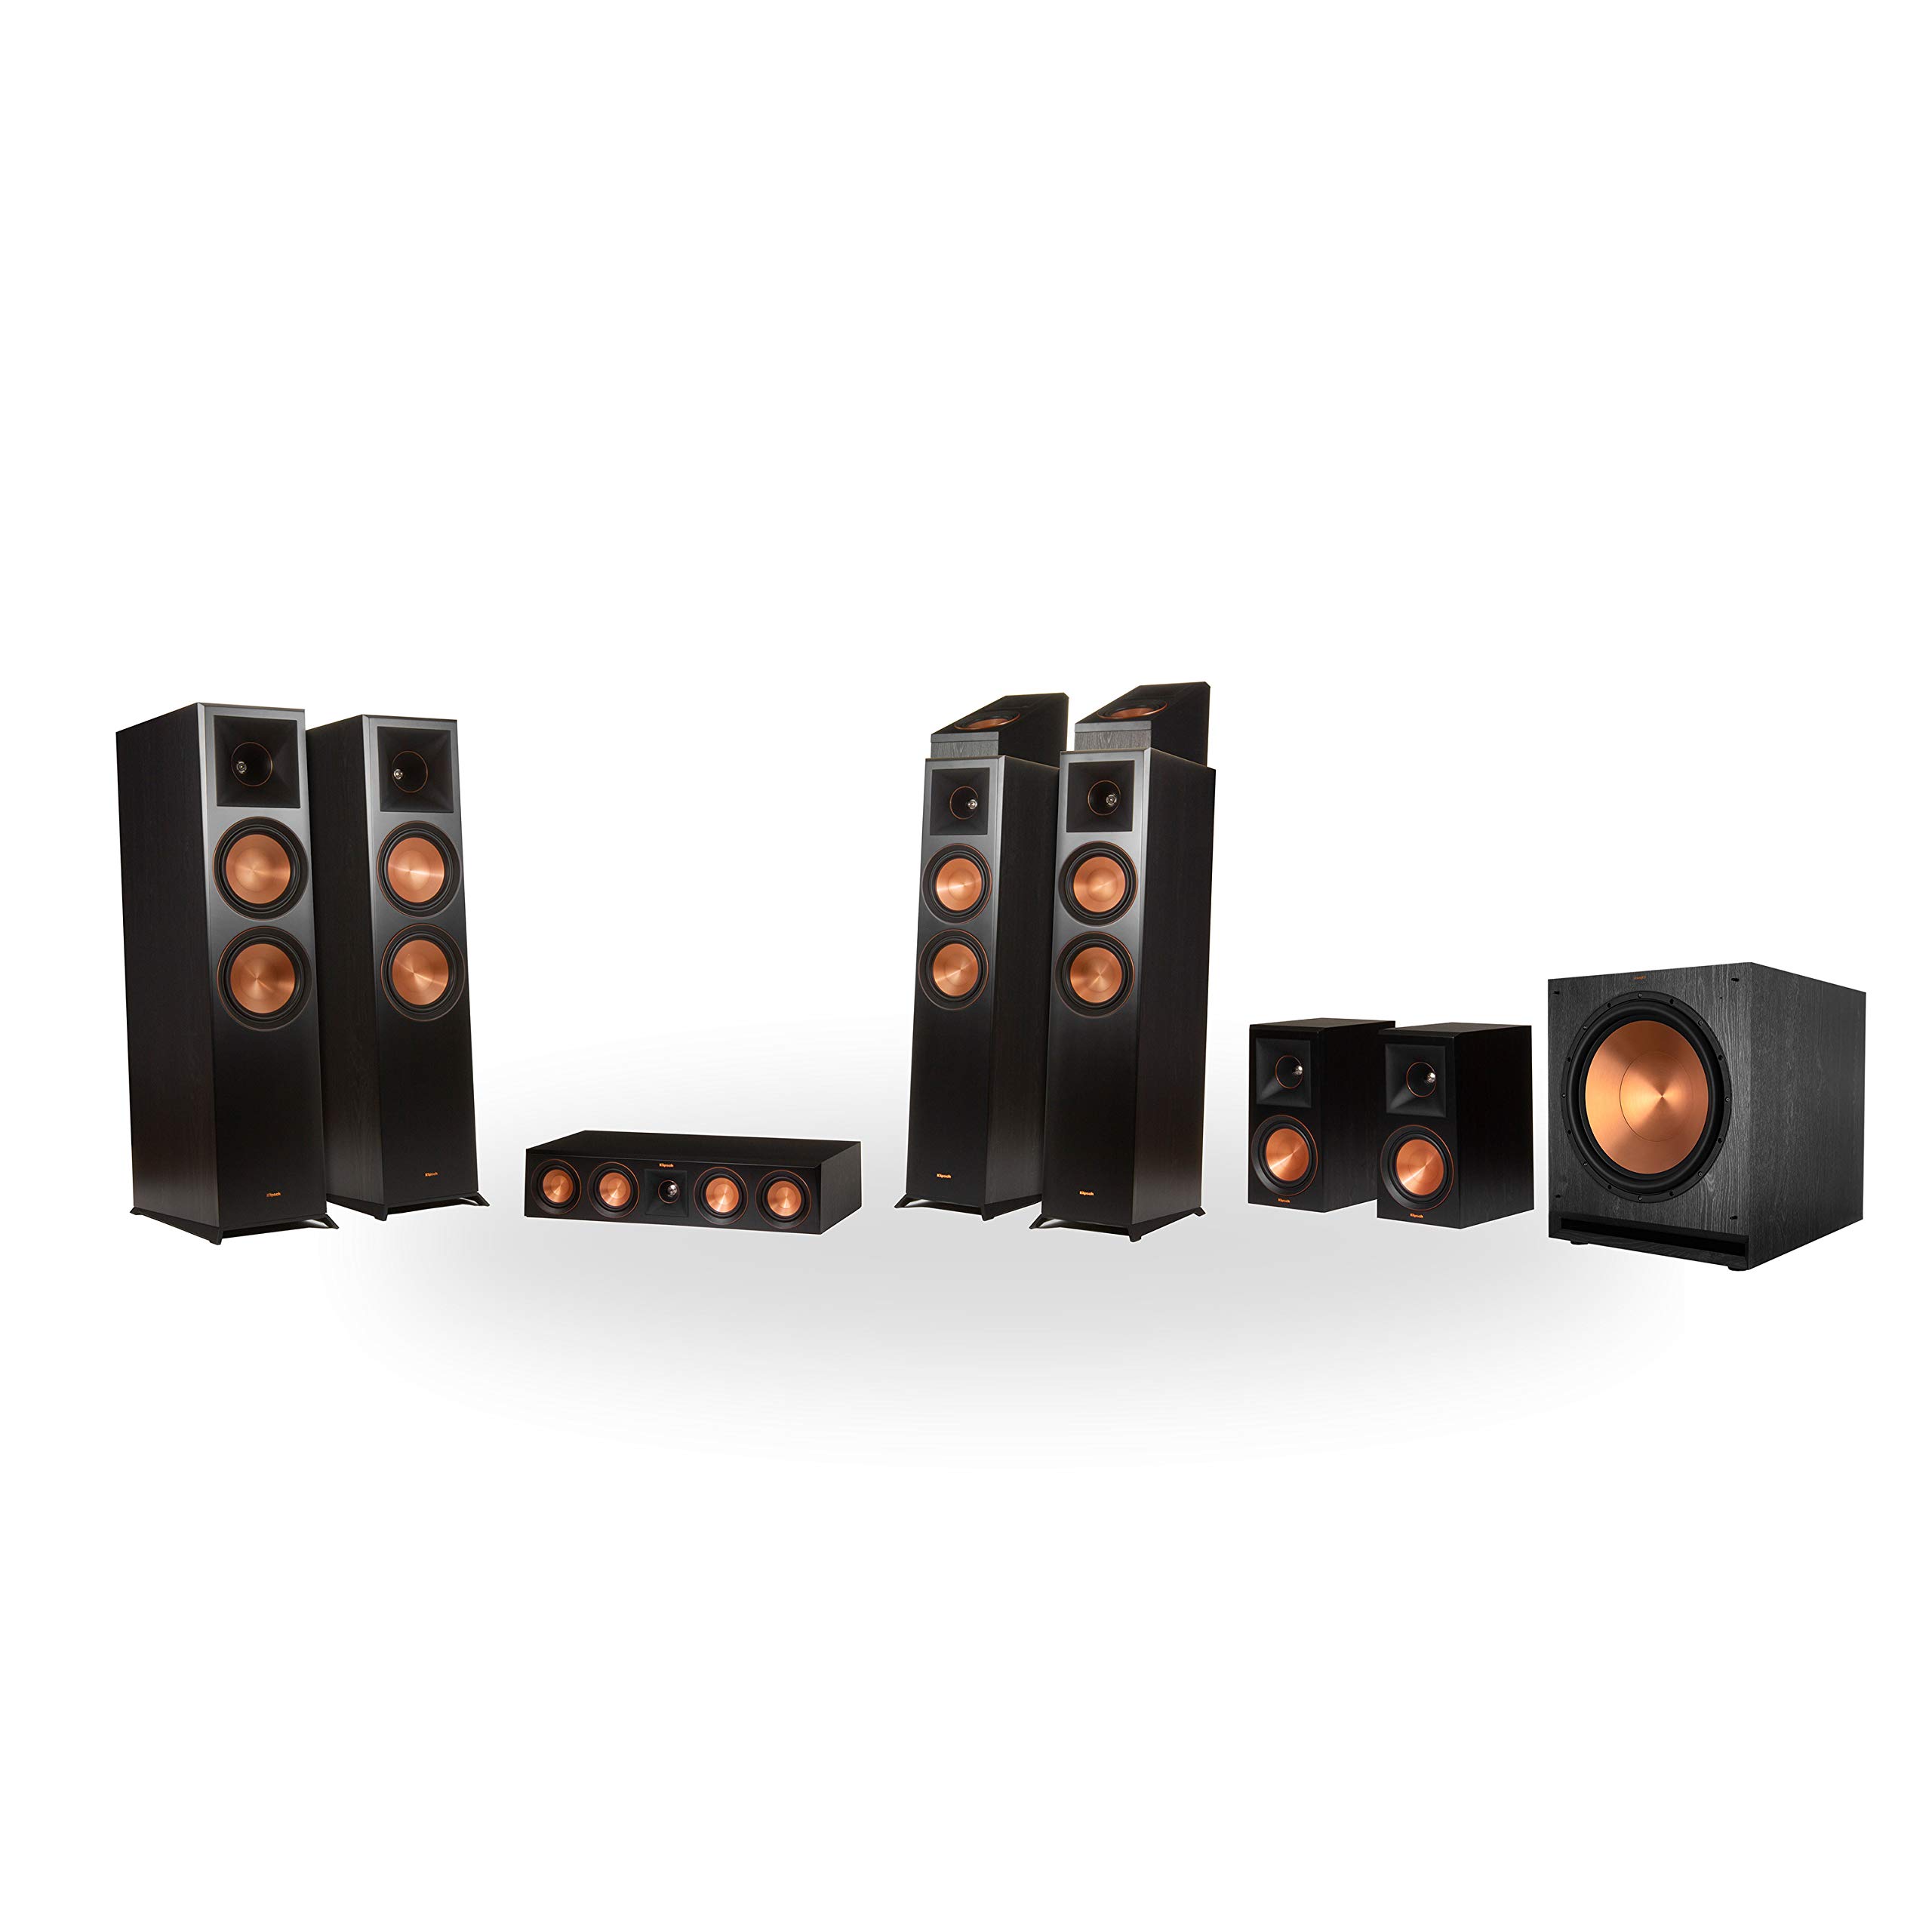 Klipsch RP-8060FA 7.1.4 Dolby Atmos Home Theater System - Ebony